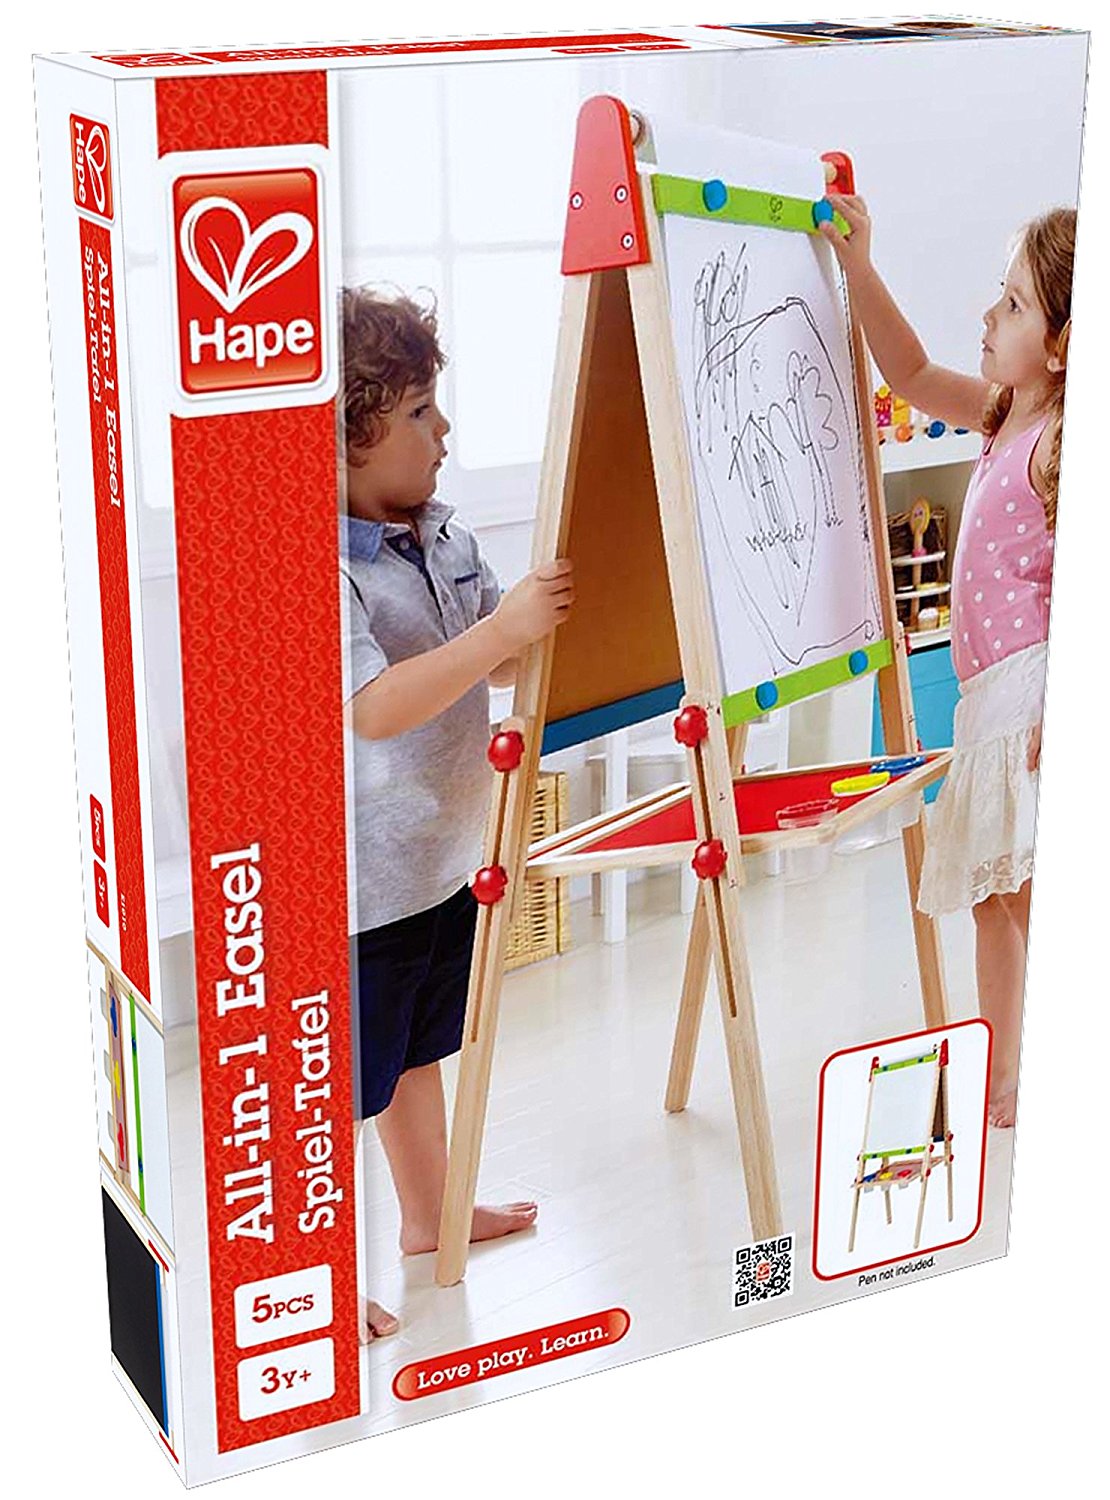 All-in-1 Easel, Multi Color